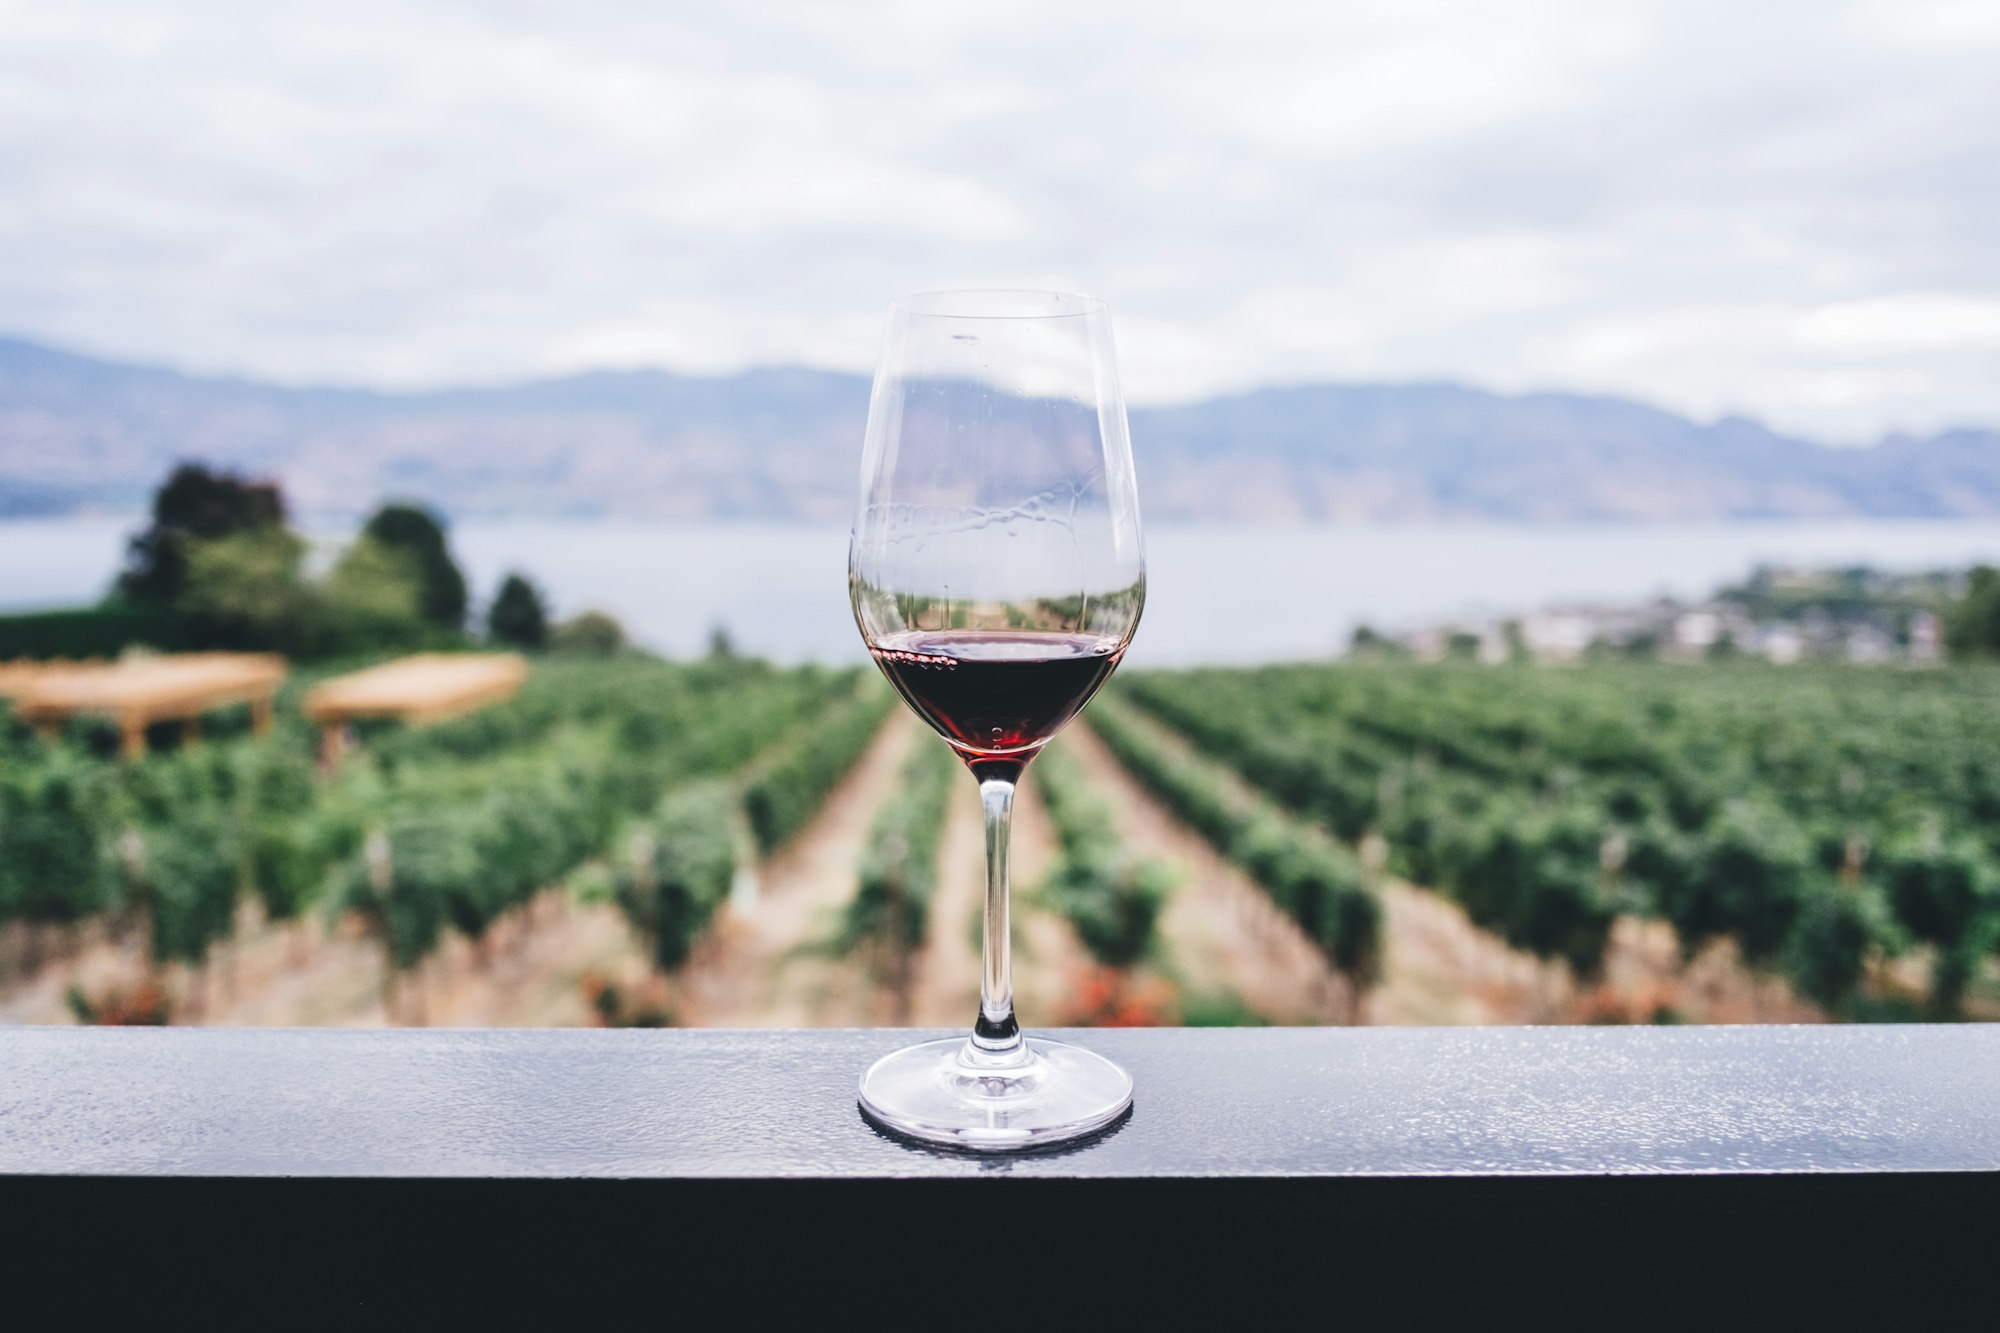 A very educational (and tasty) weekend can be had if you explore the wine region of the Okanagen Valley in Canada.